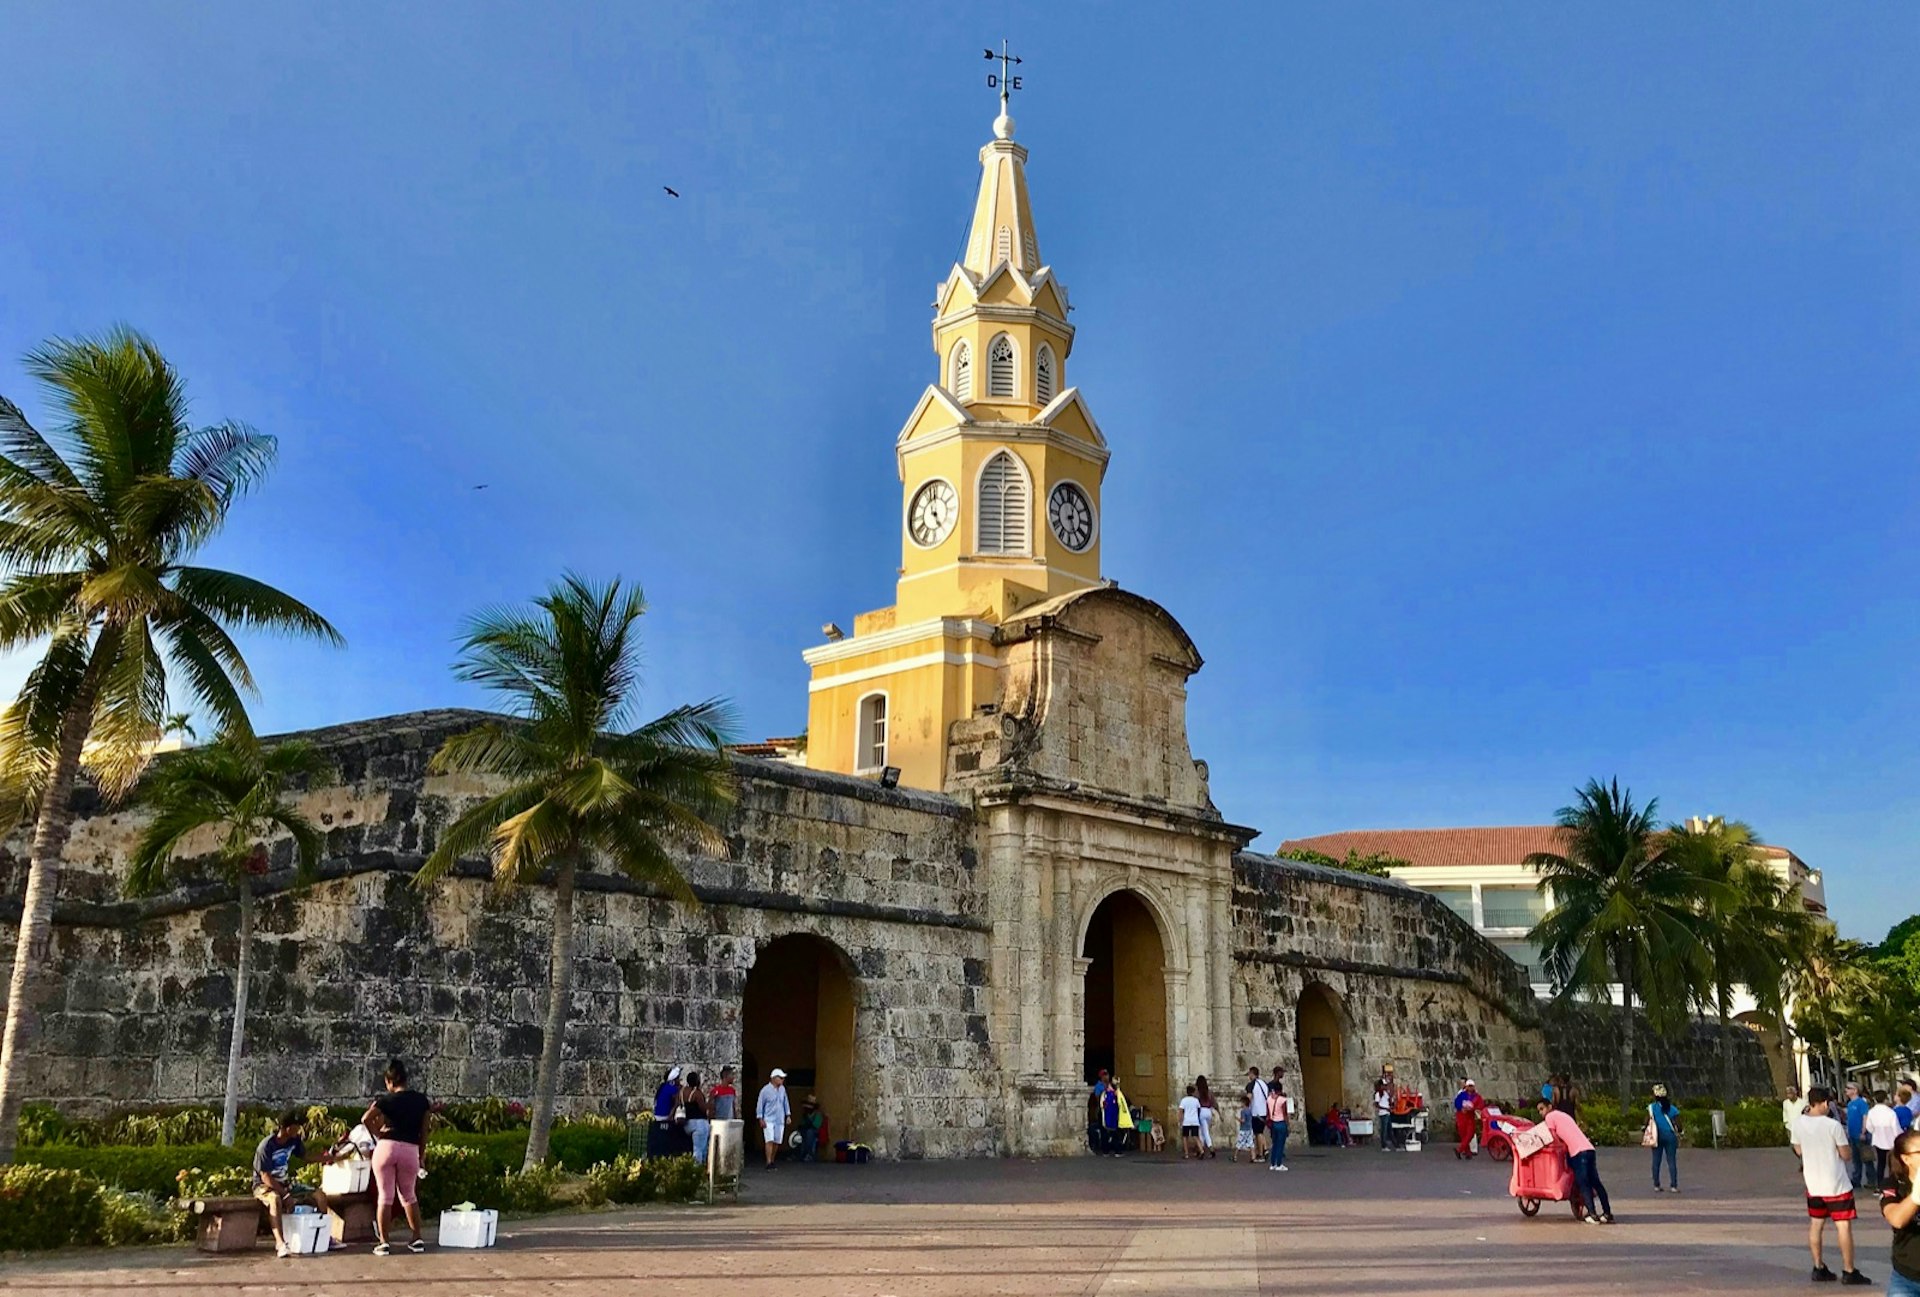 The yellow church tower over an old city wall, with people in a courtyard below; free things to do in Cartagena